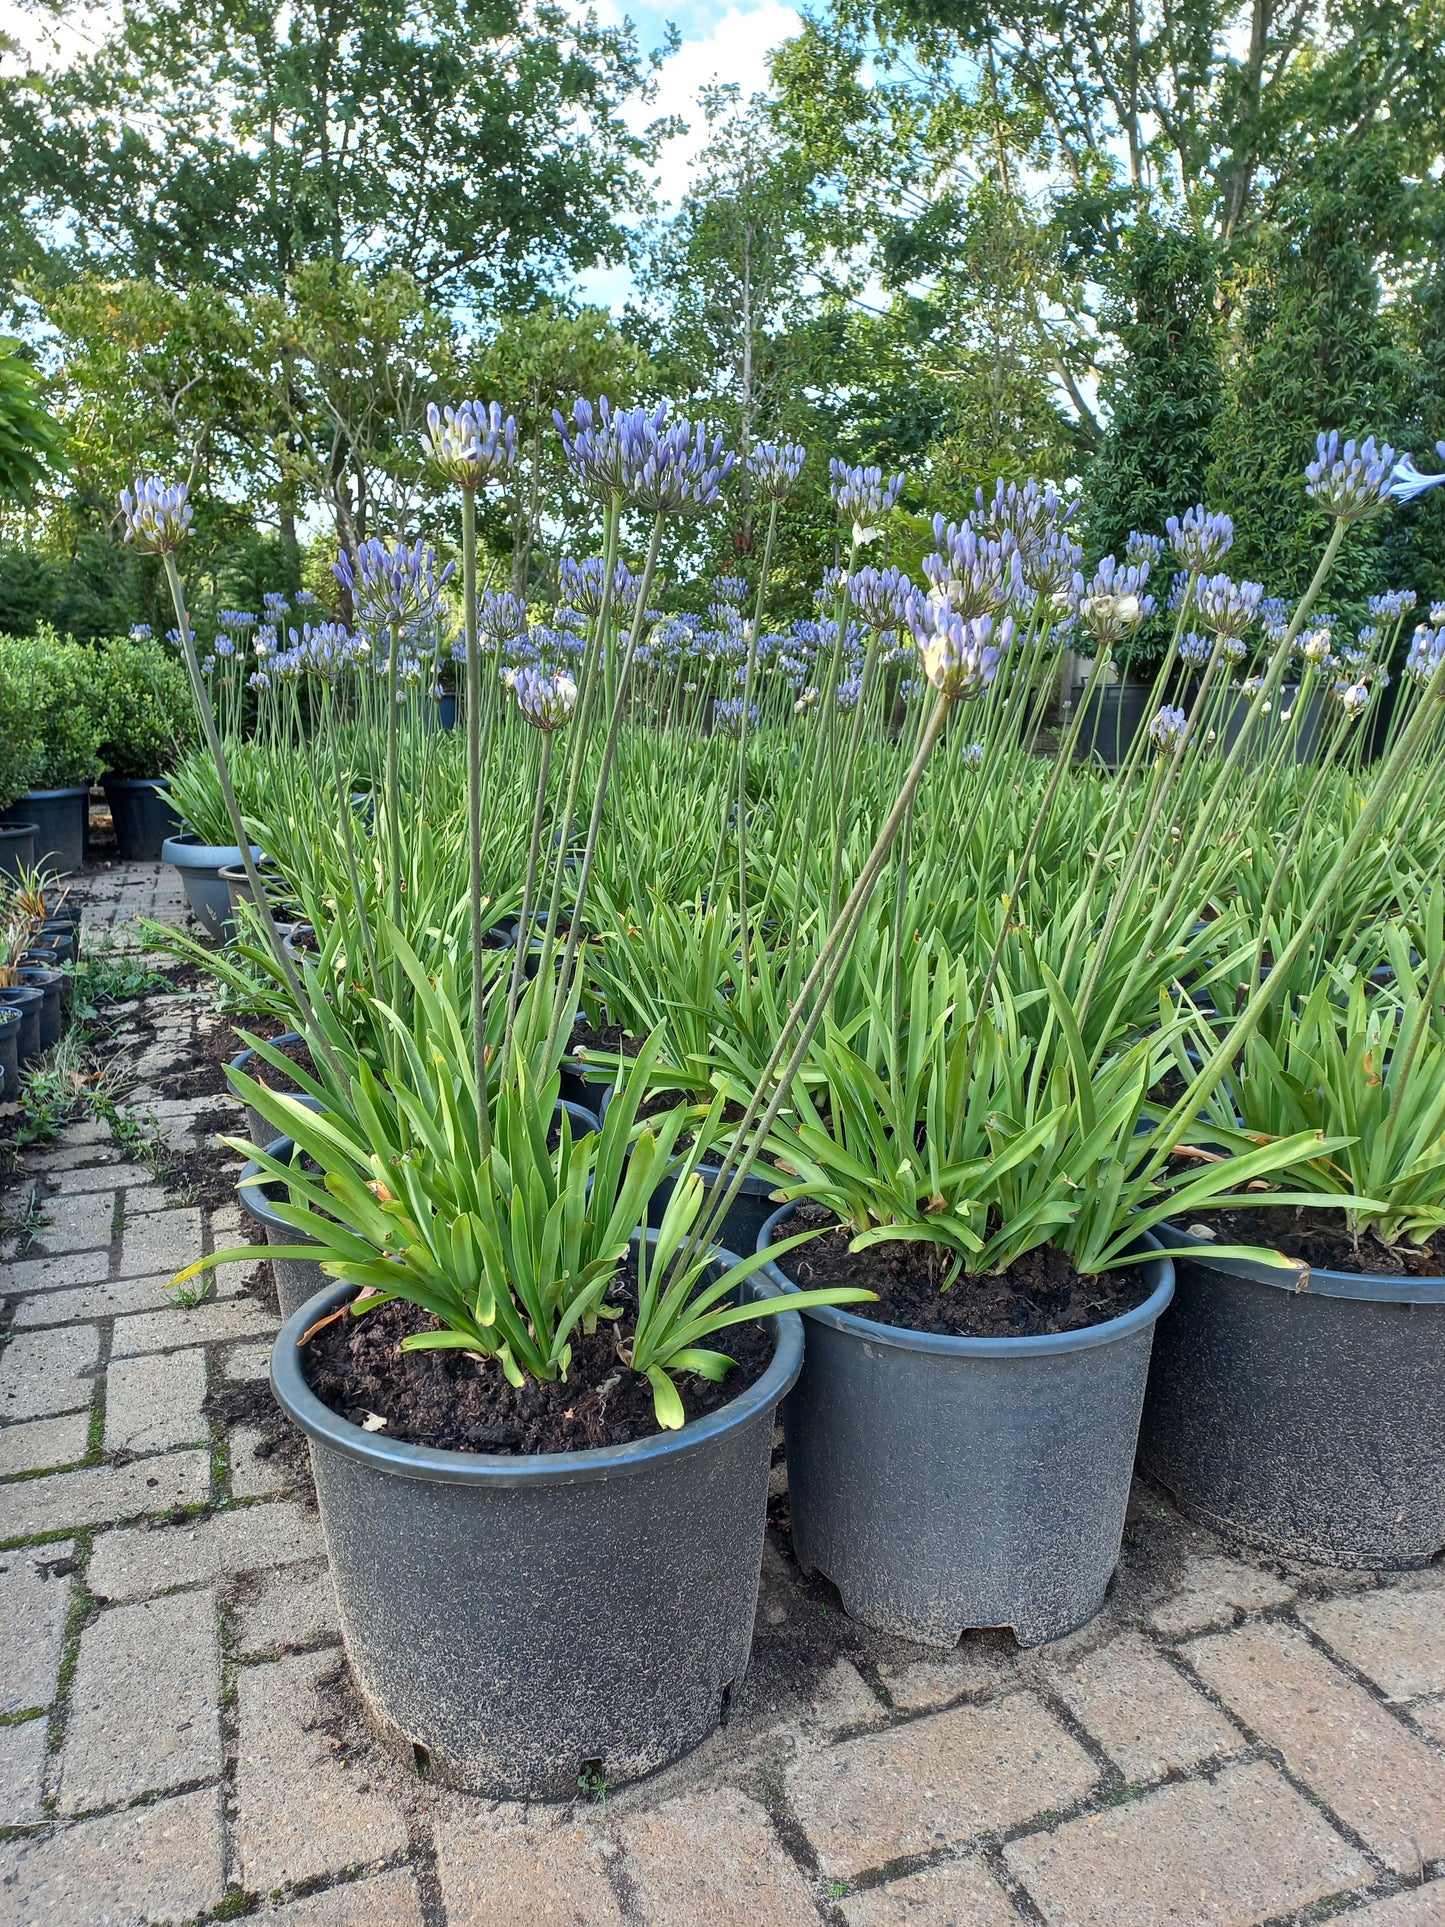 Agapanthus Dr. brouwer